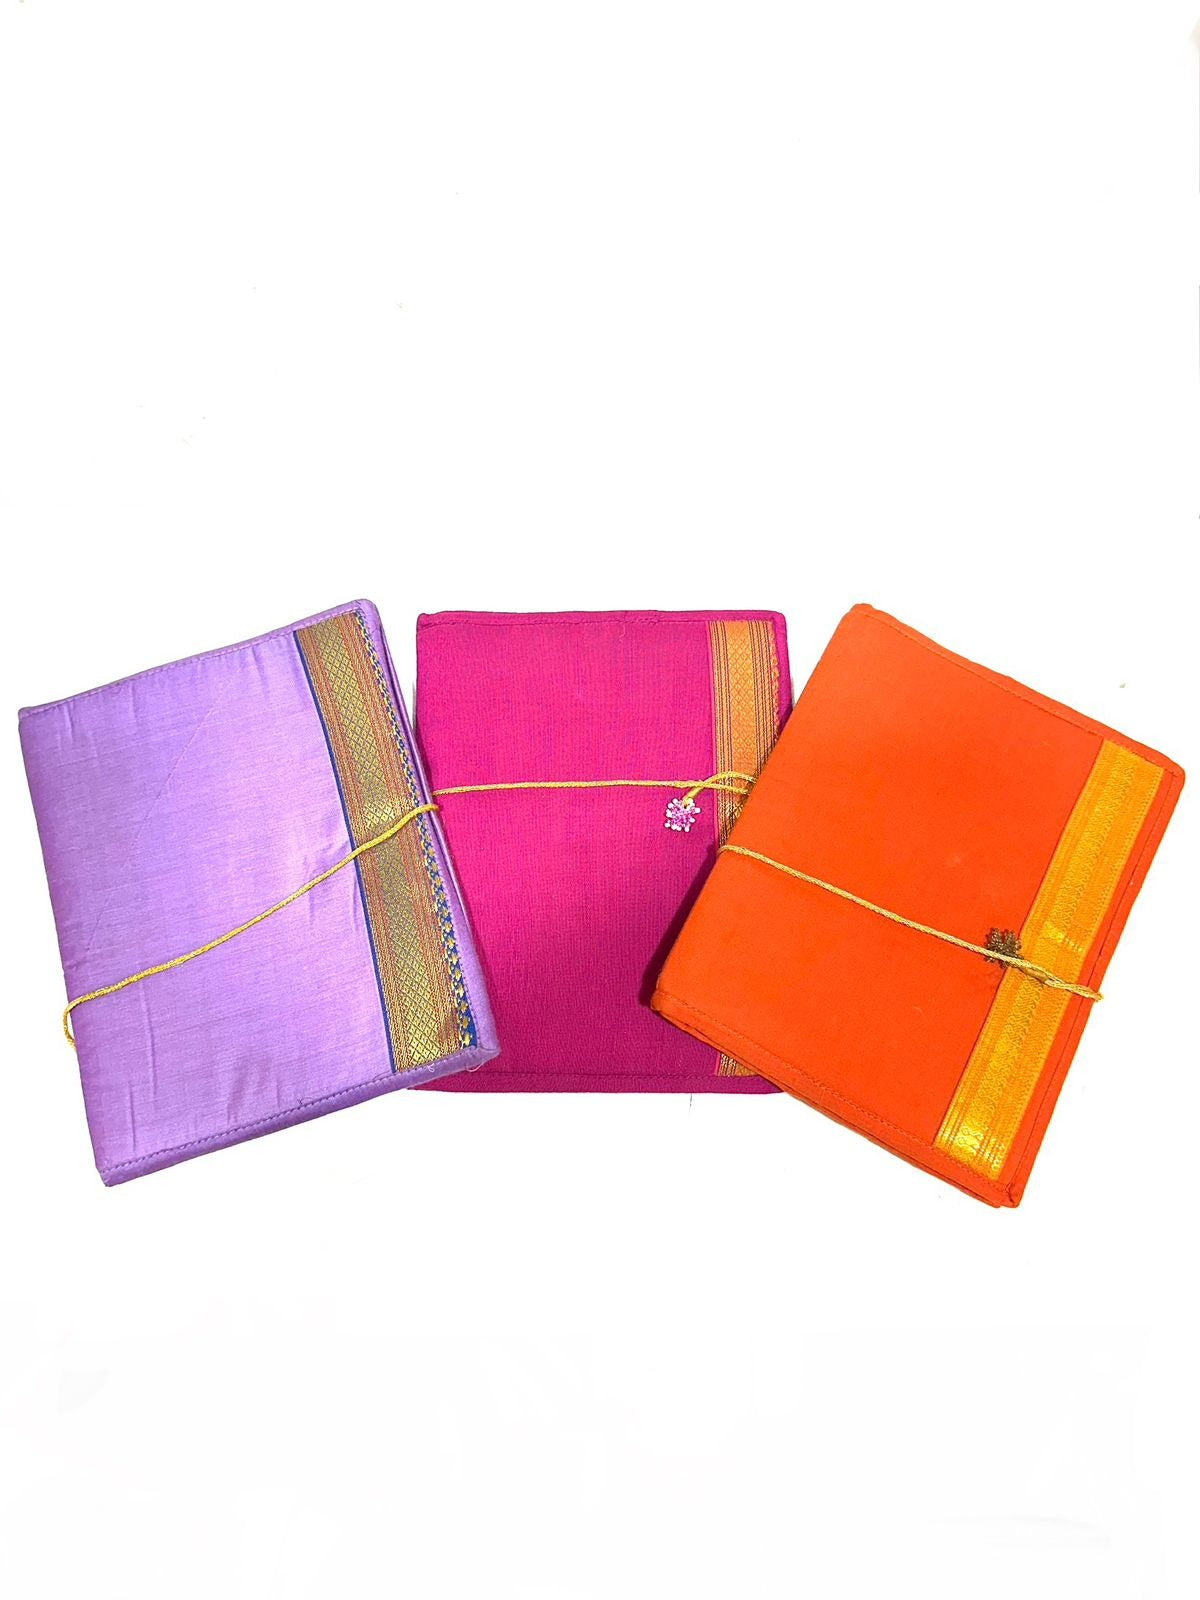 Designer Handmade Diary Artistic Collection For Personal Gifts From Tamrapatra